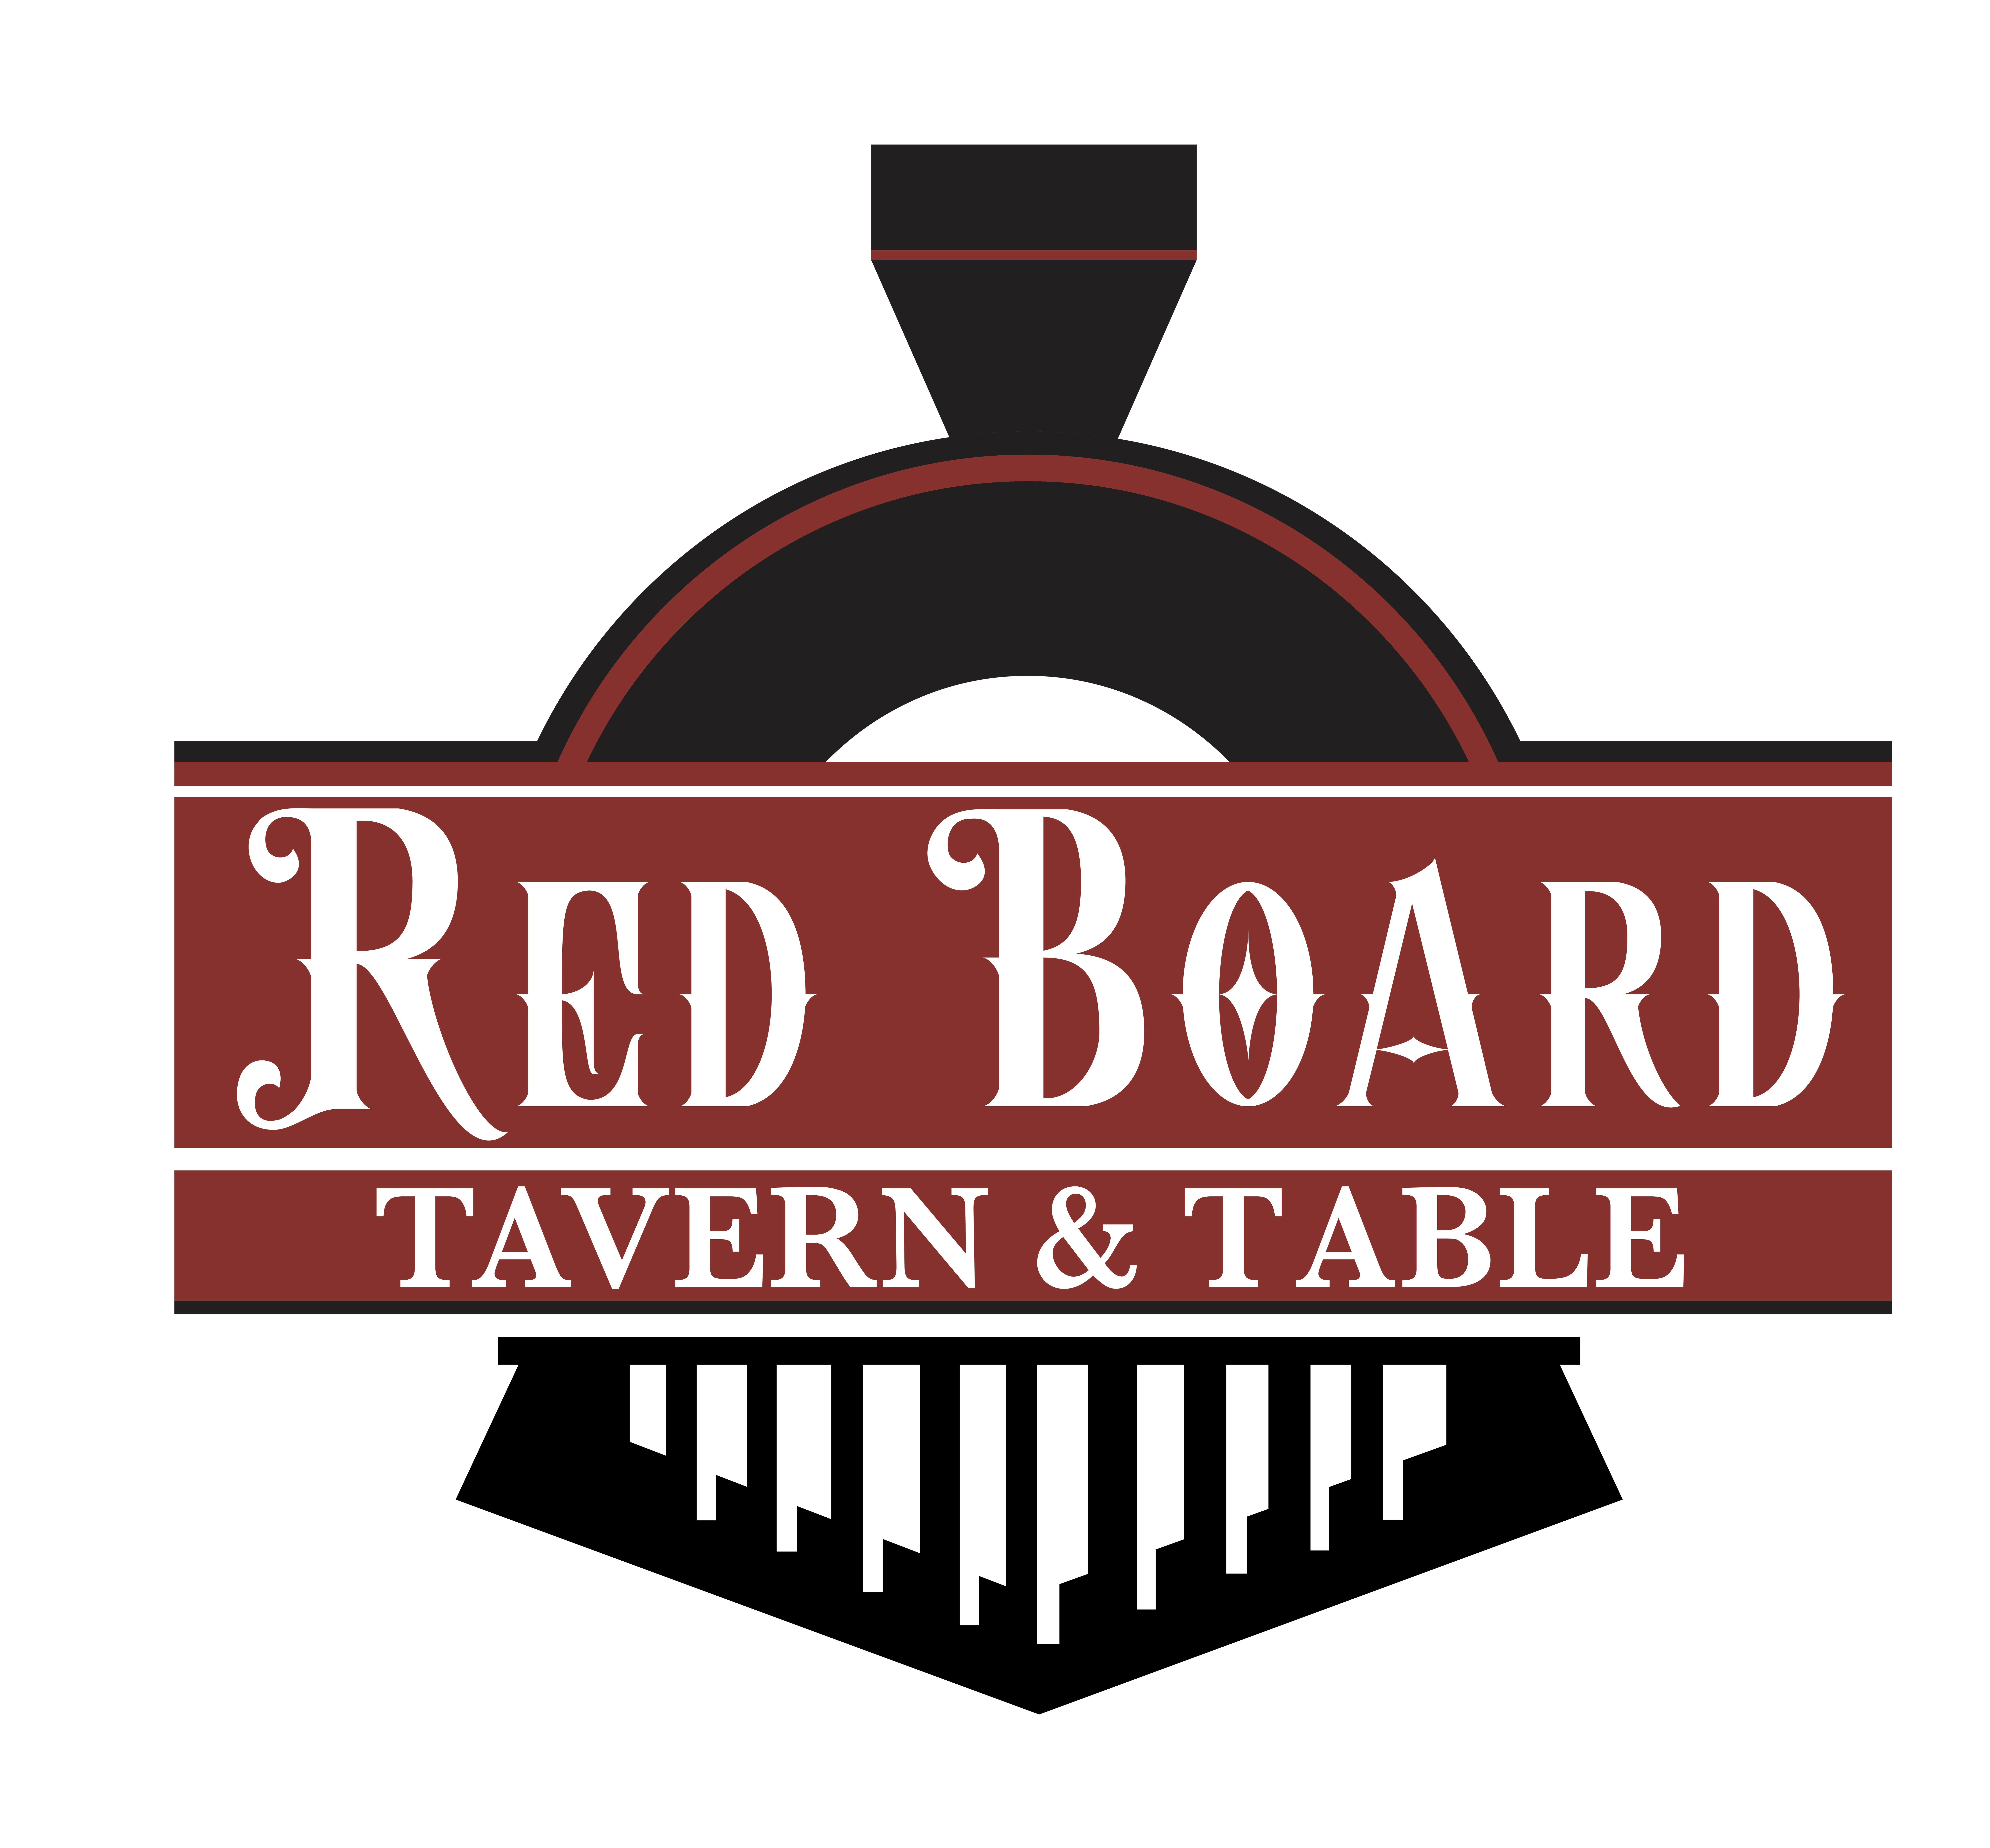 Red Board Tavern & Table